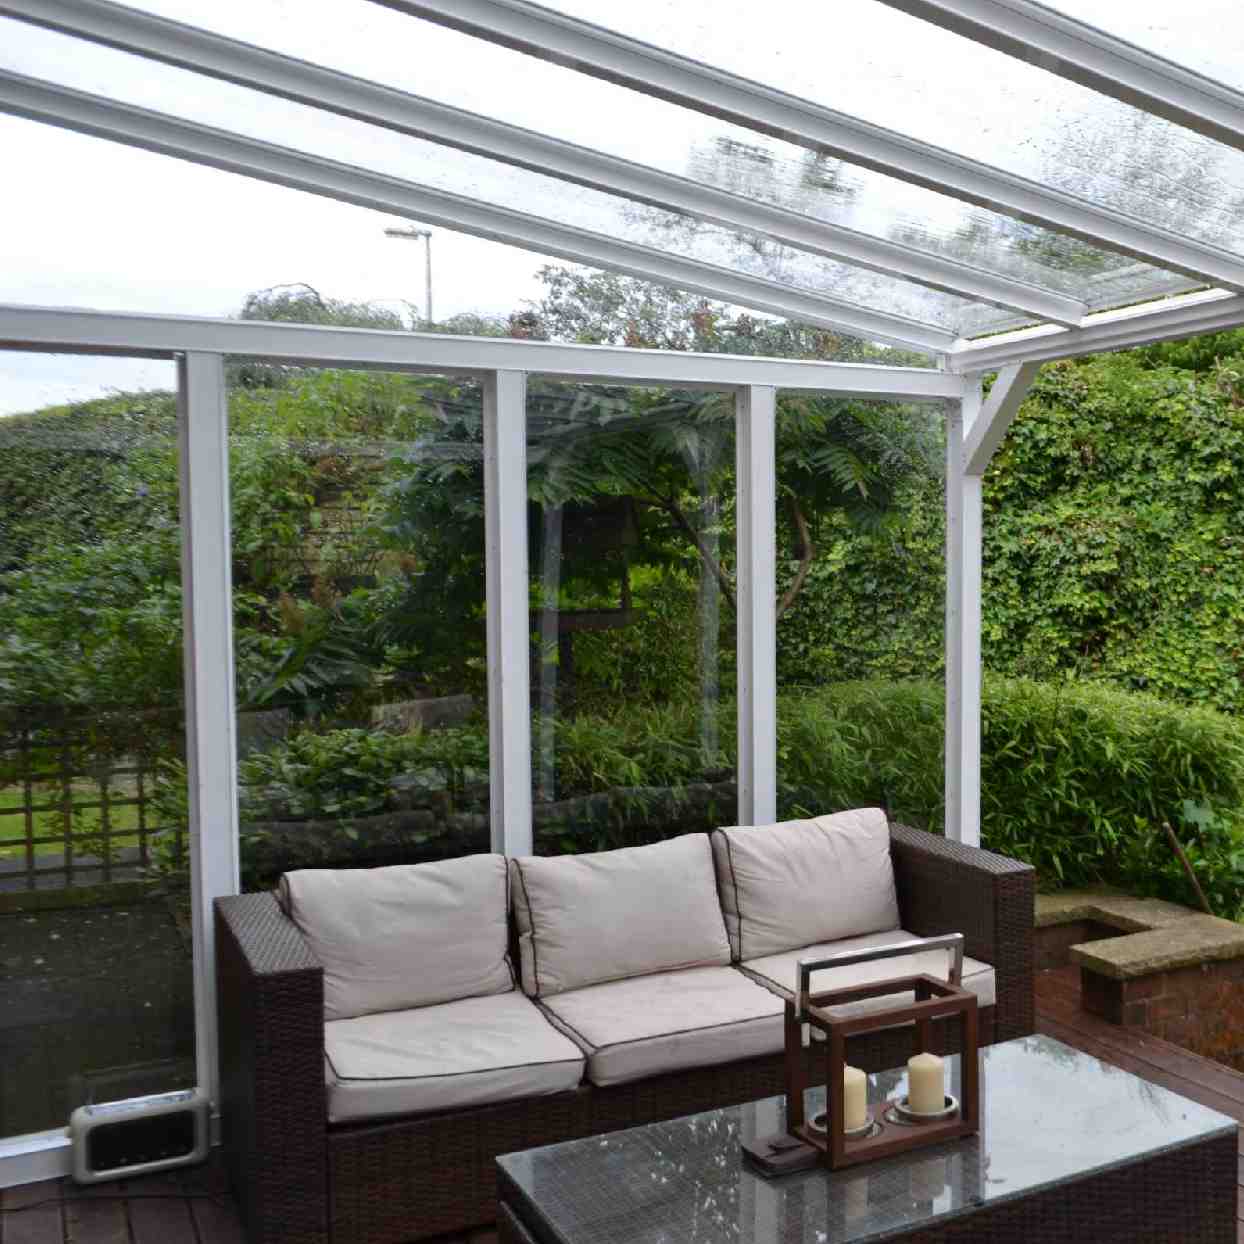 Buy Omega Verandah White with 6mm Glass Clear Plate Polycarbonate Glazing - 6.3m (W) x 2.5m (P), (4) Supporting Posts online today